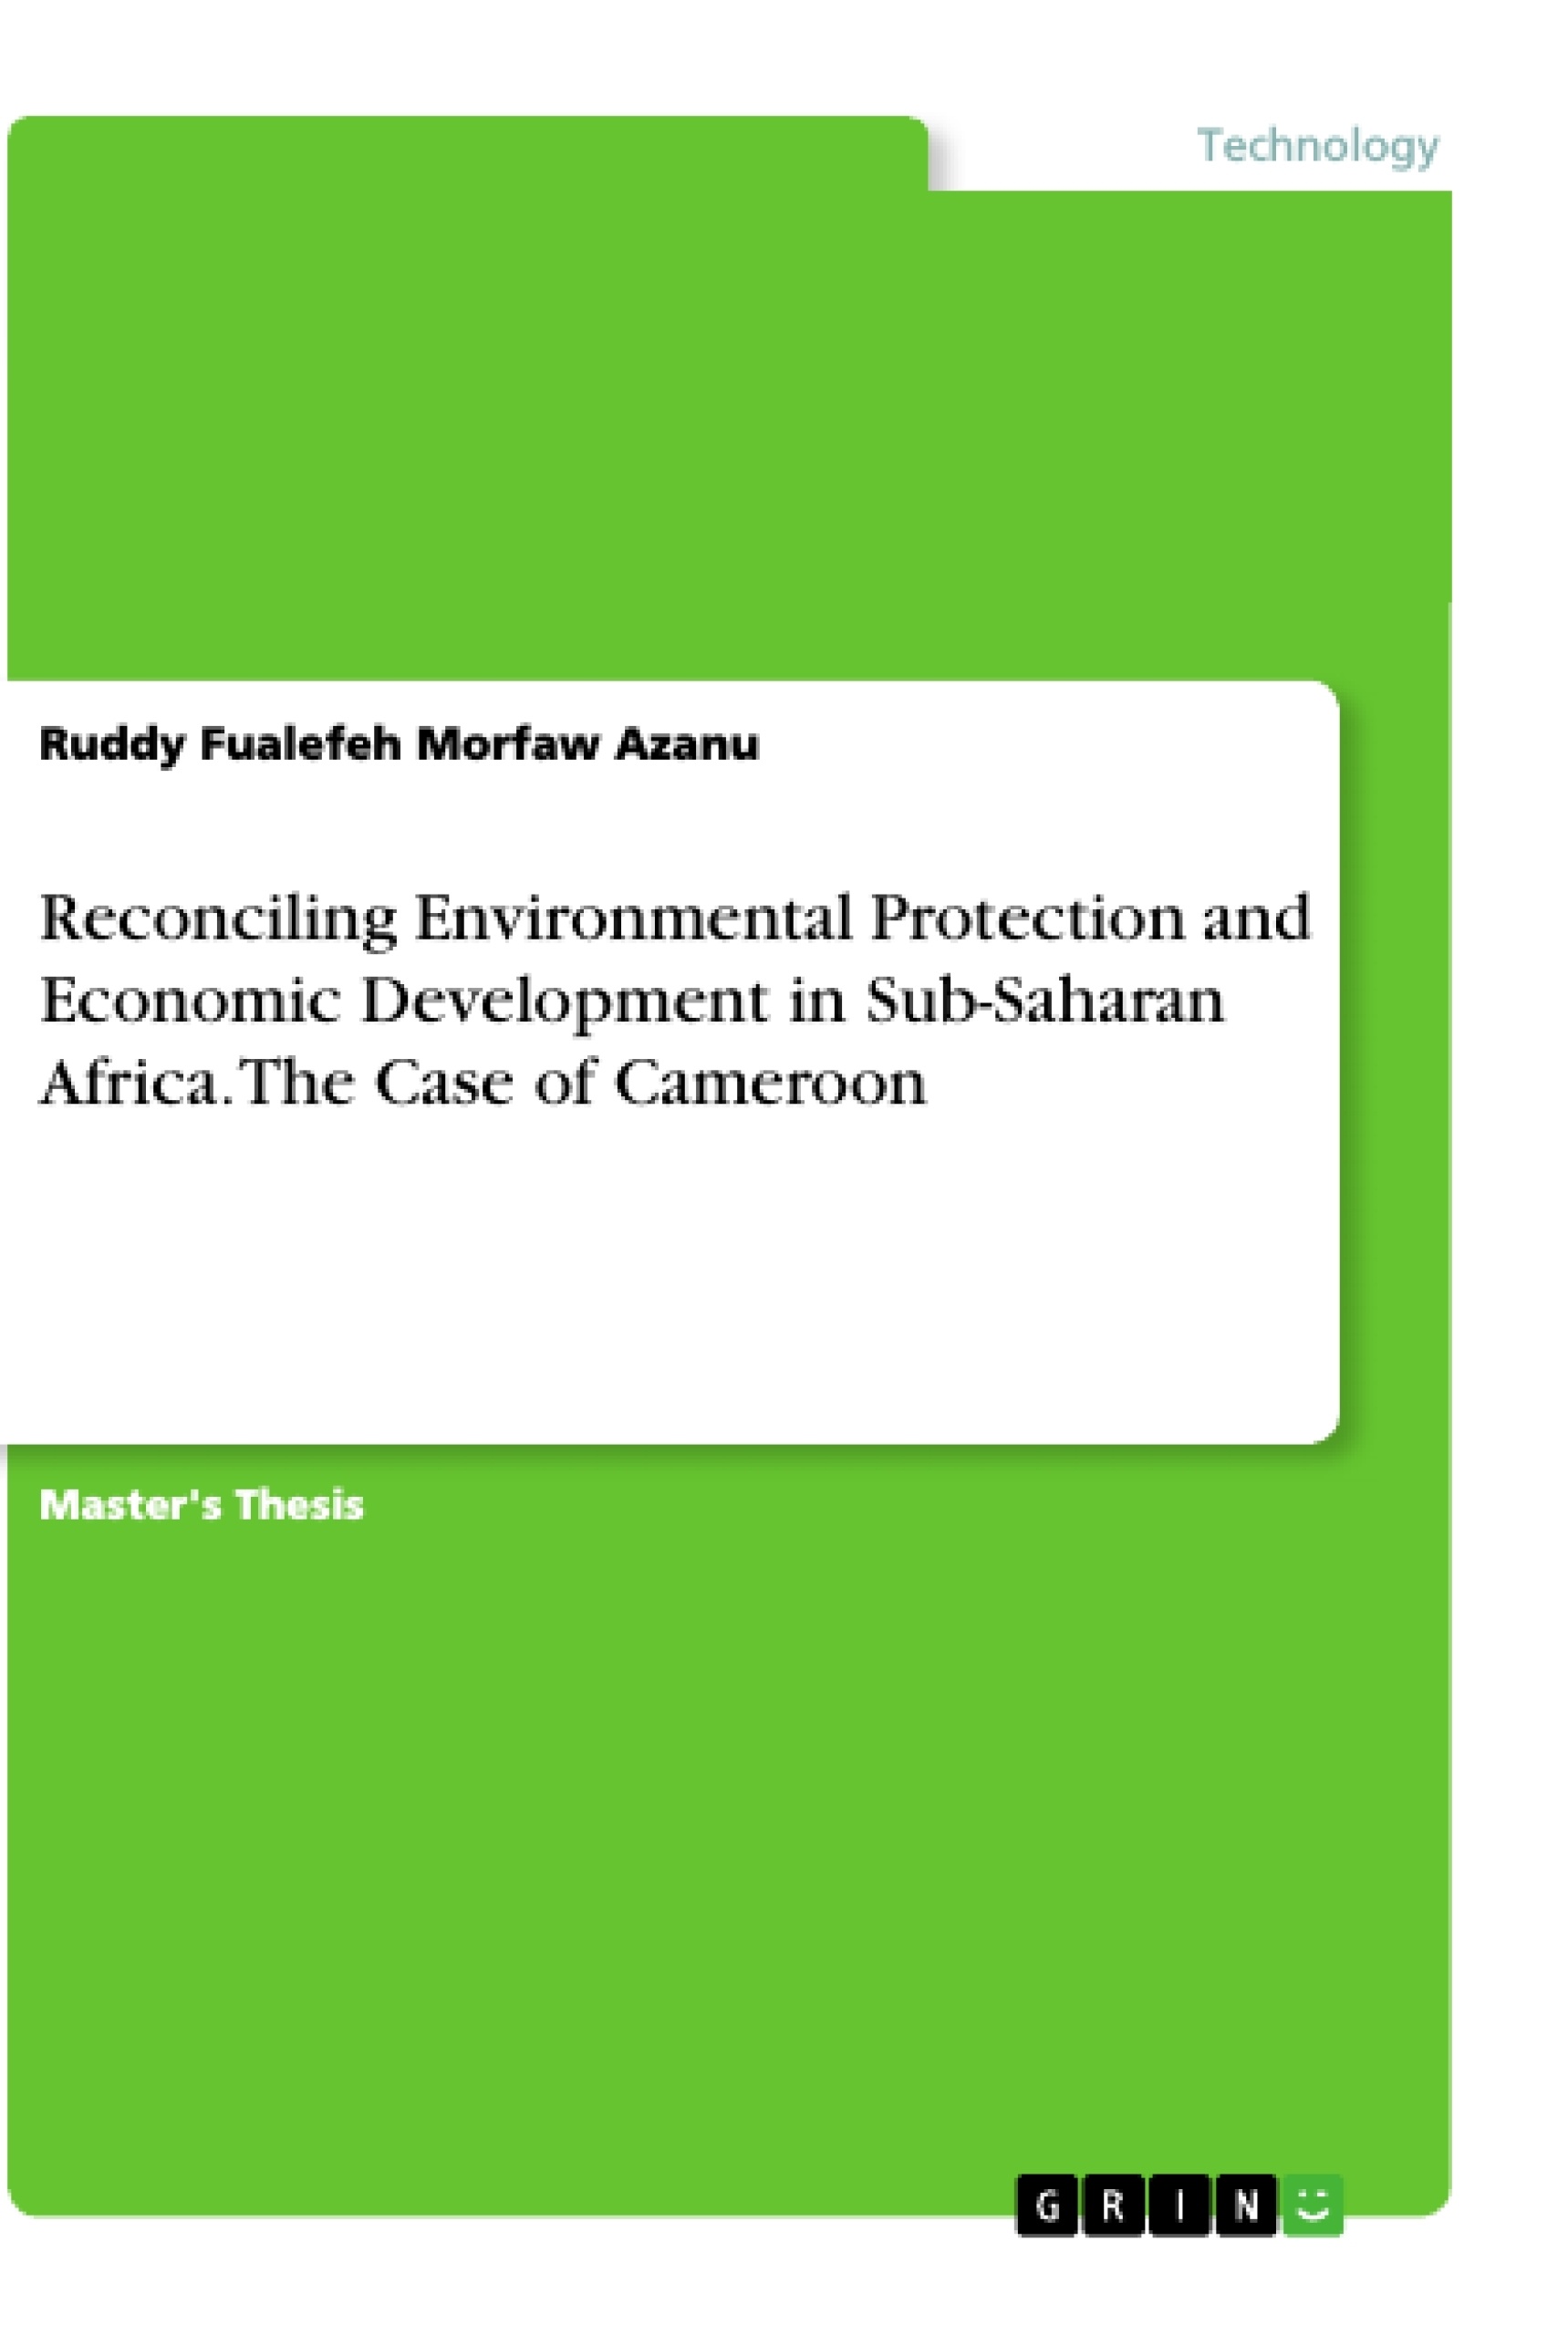 Título: Reconciling Environmental Protection and Economic Development in Sub-Saharan Africa. The Case of Cameroon